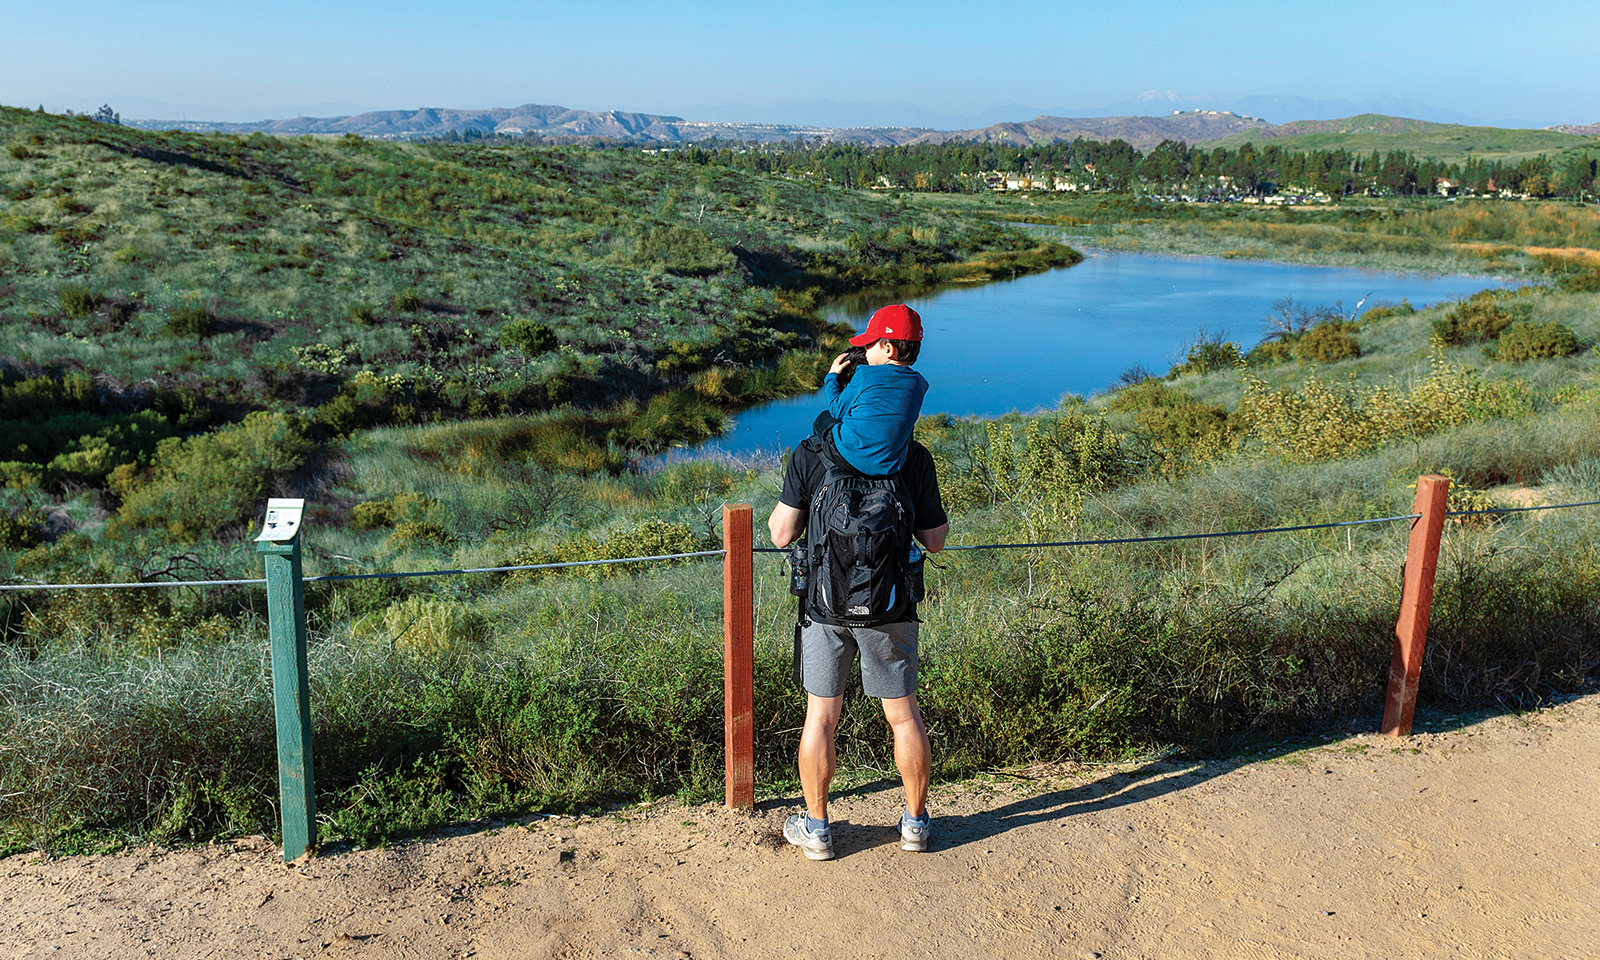 Enjoy some of OC’s best views at Peters Canyon